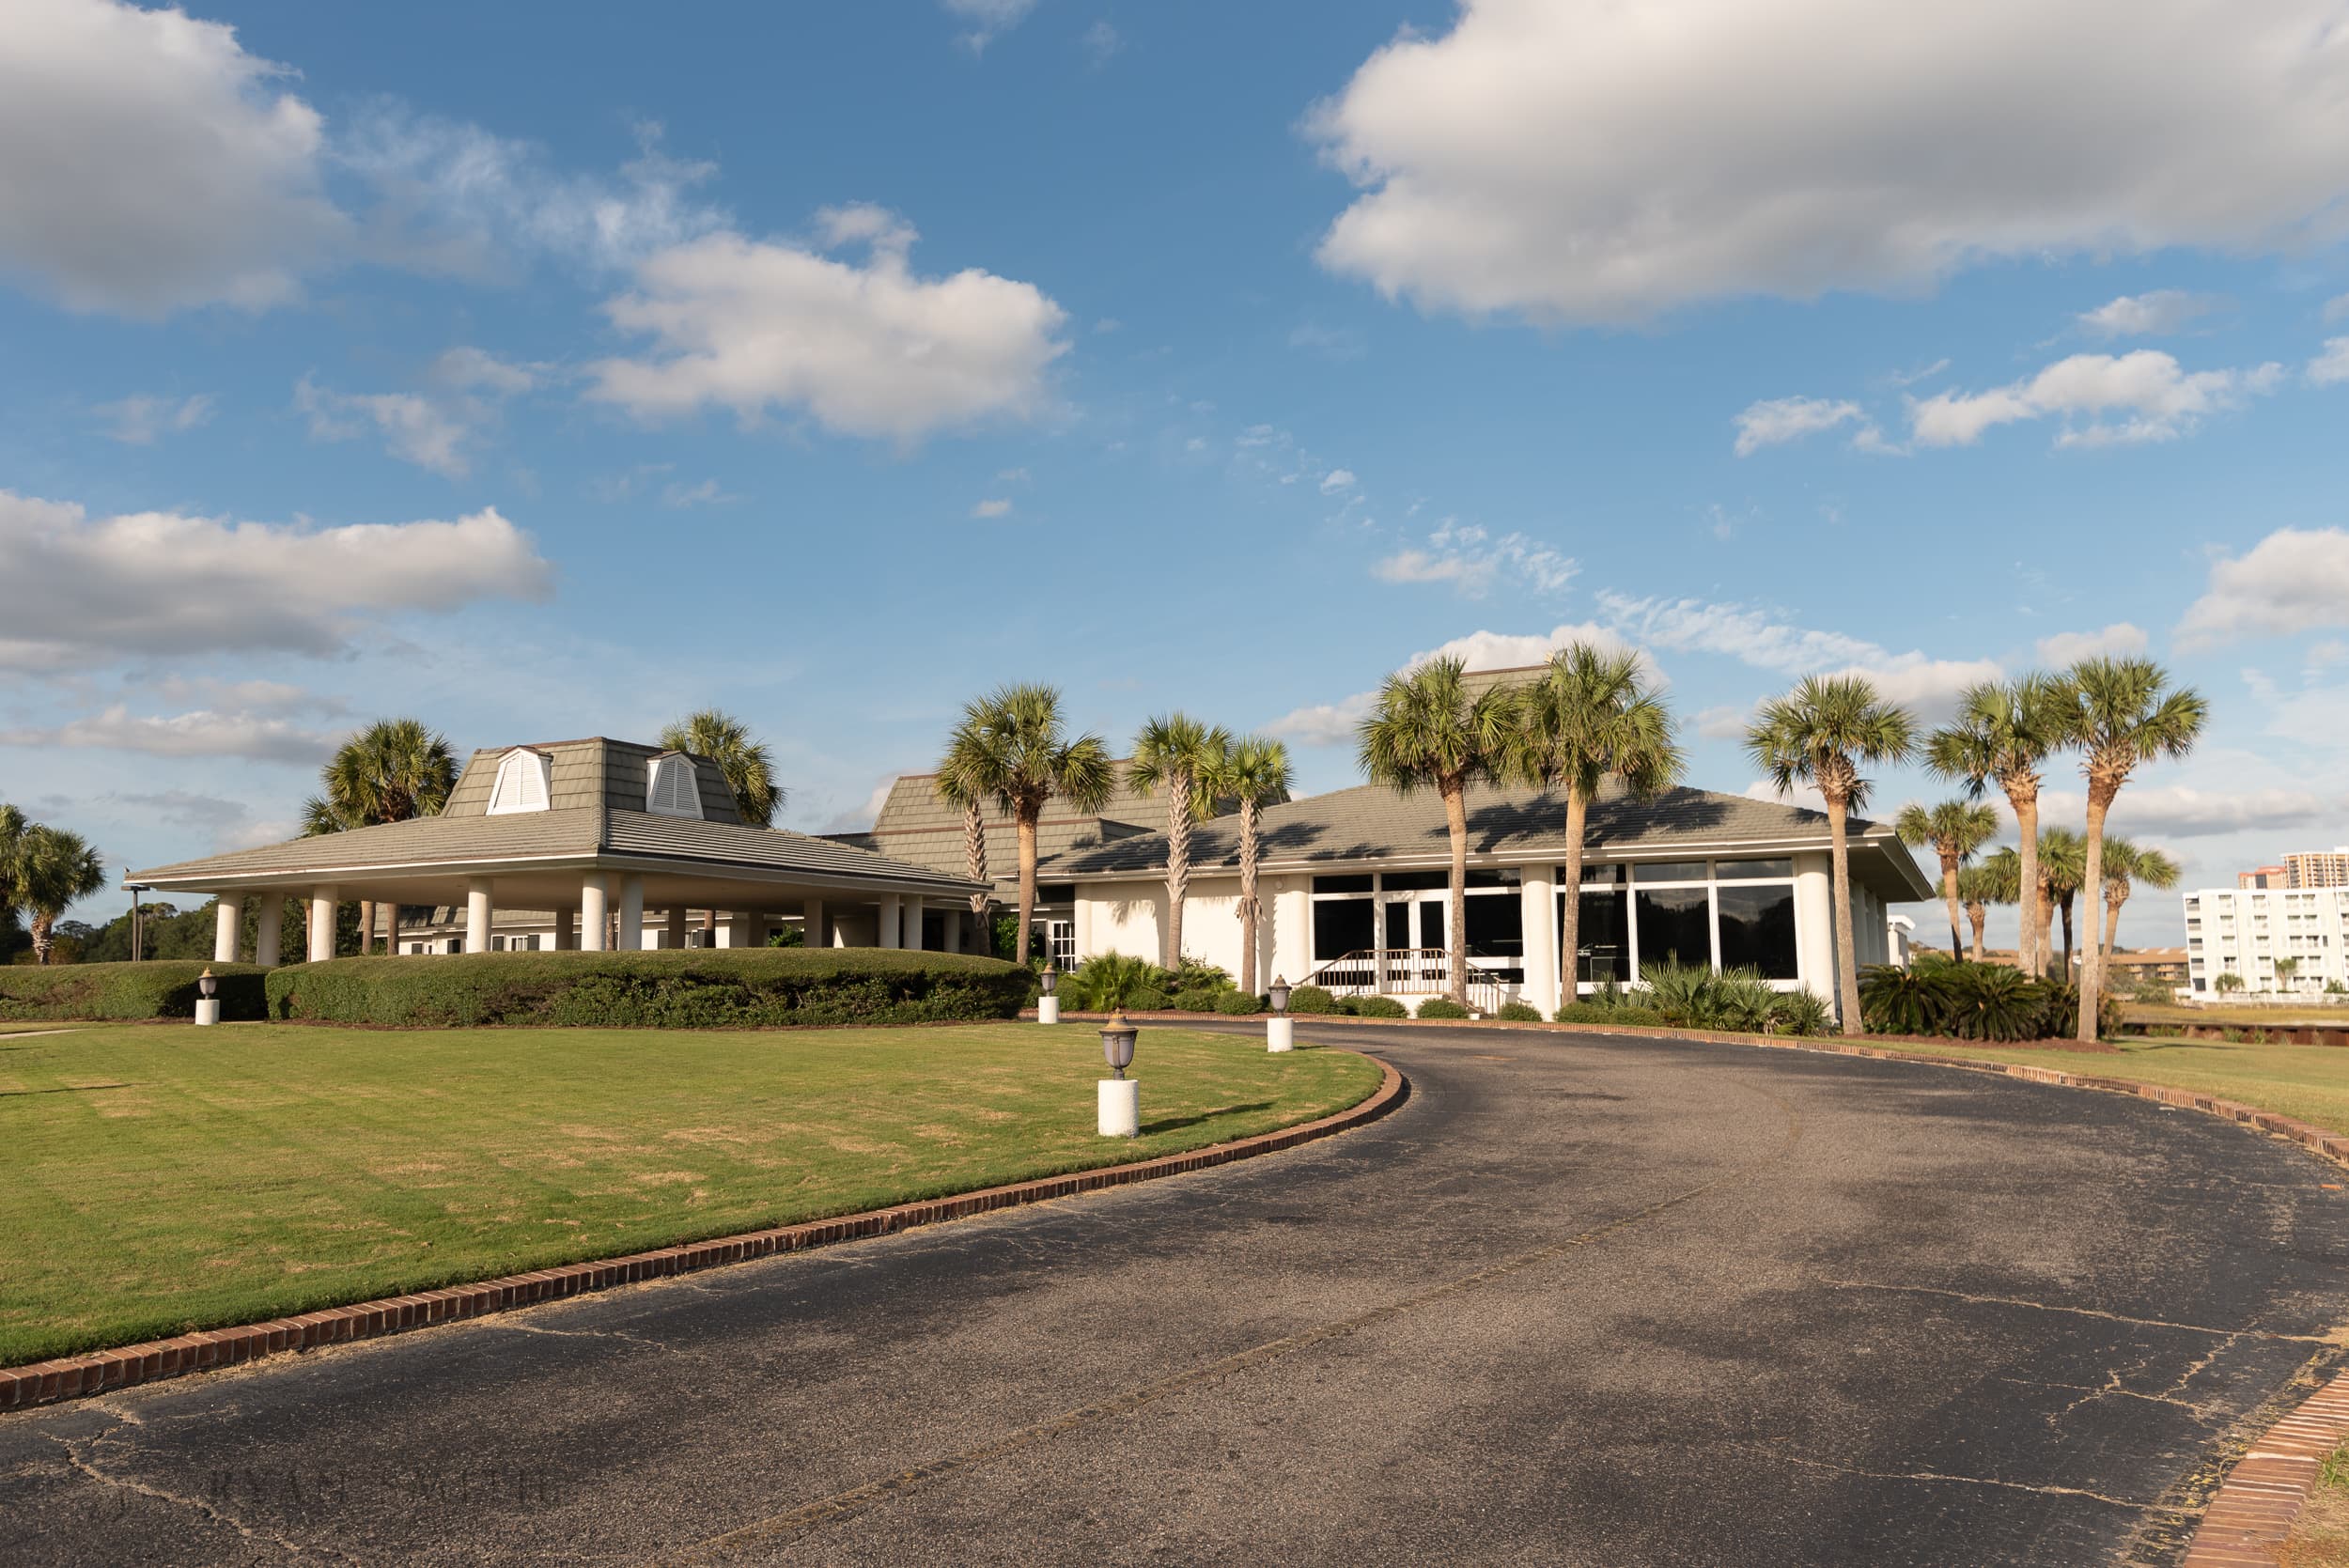 Picture of the clubhouse - Dunes Golf and Beach Club - Myrtle Beach